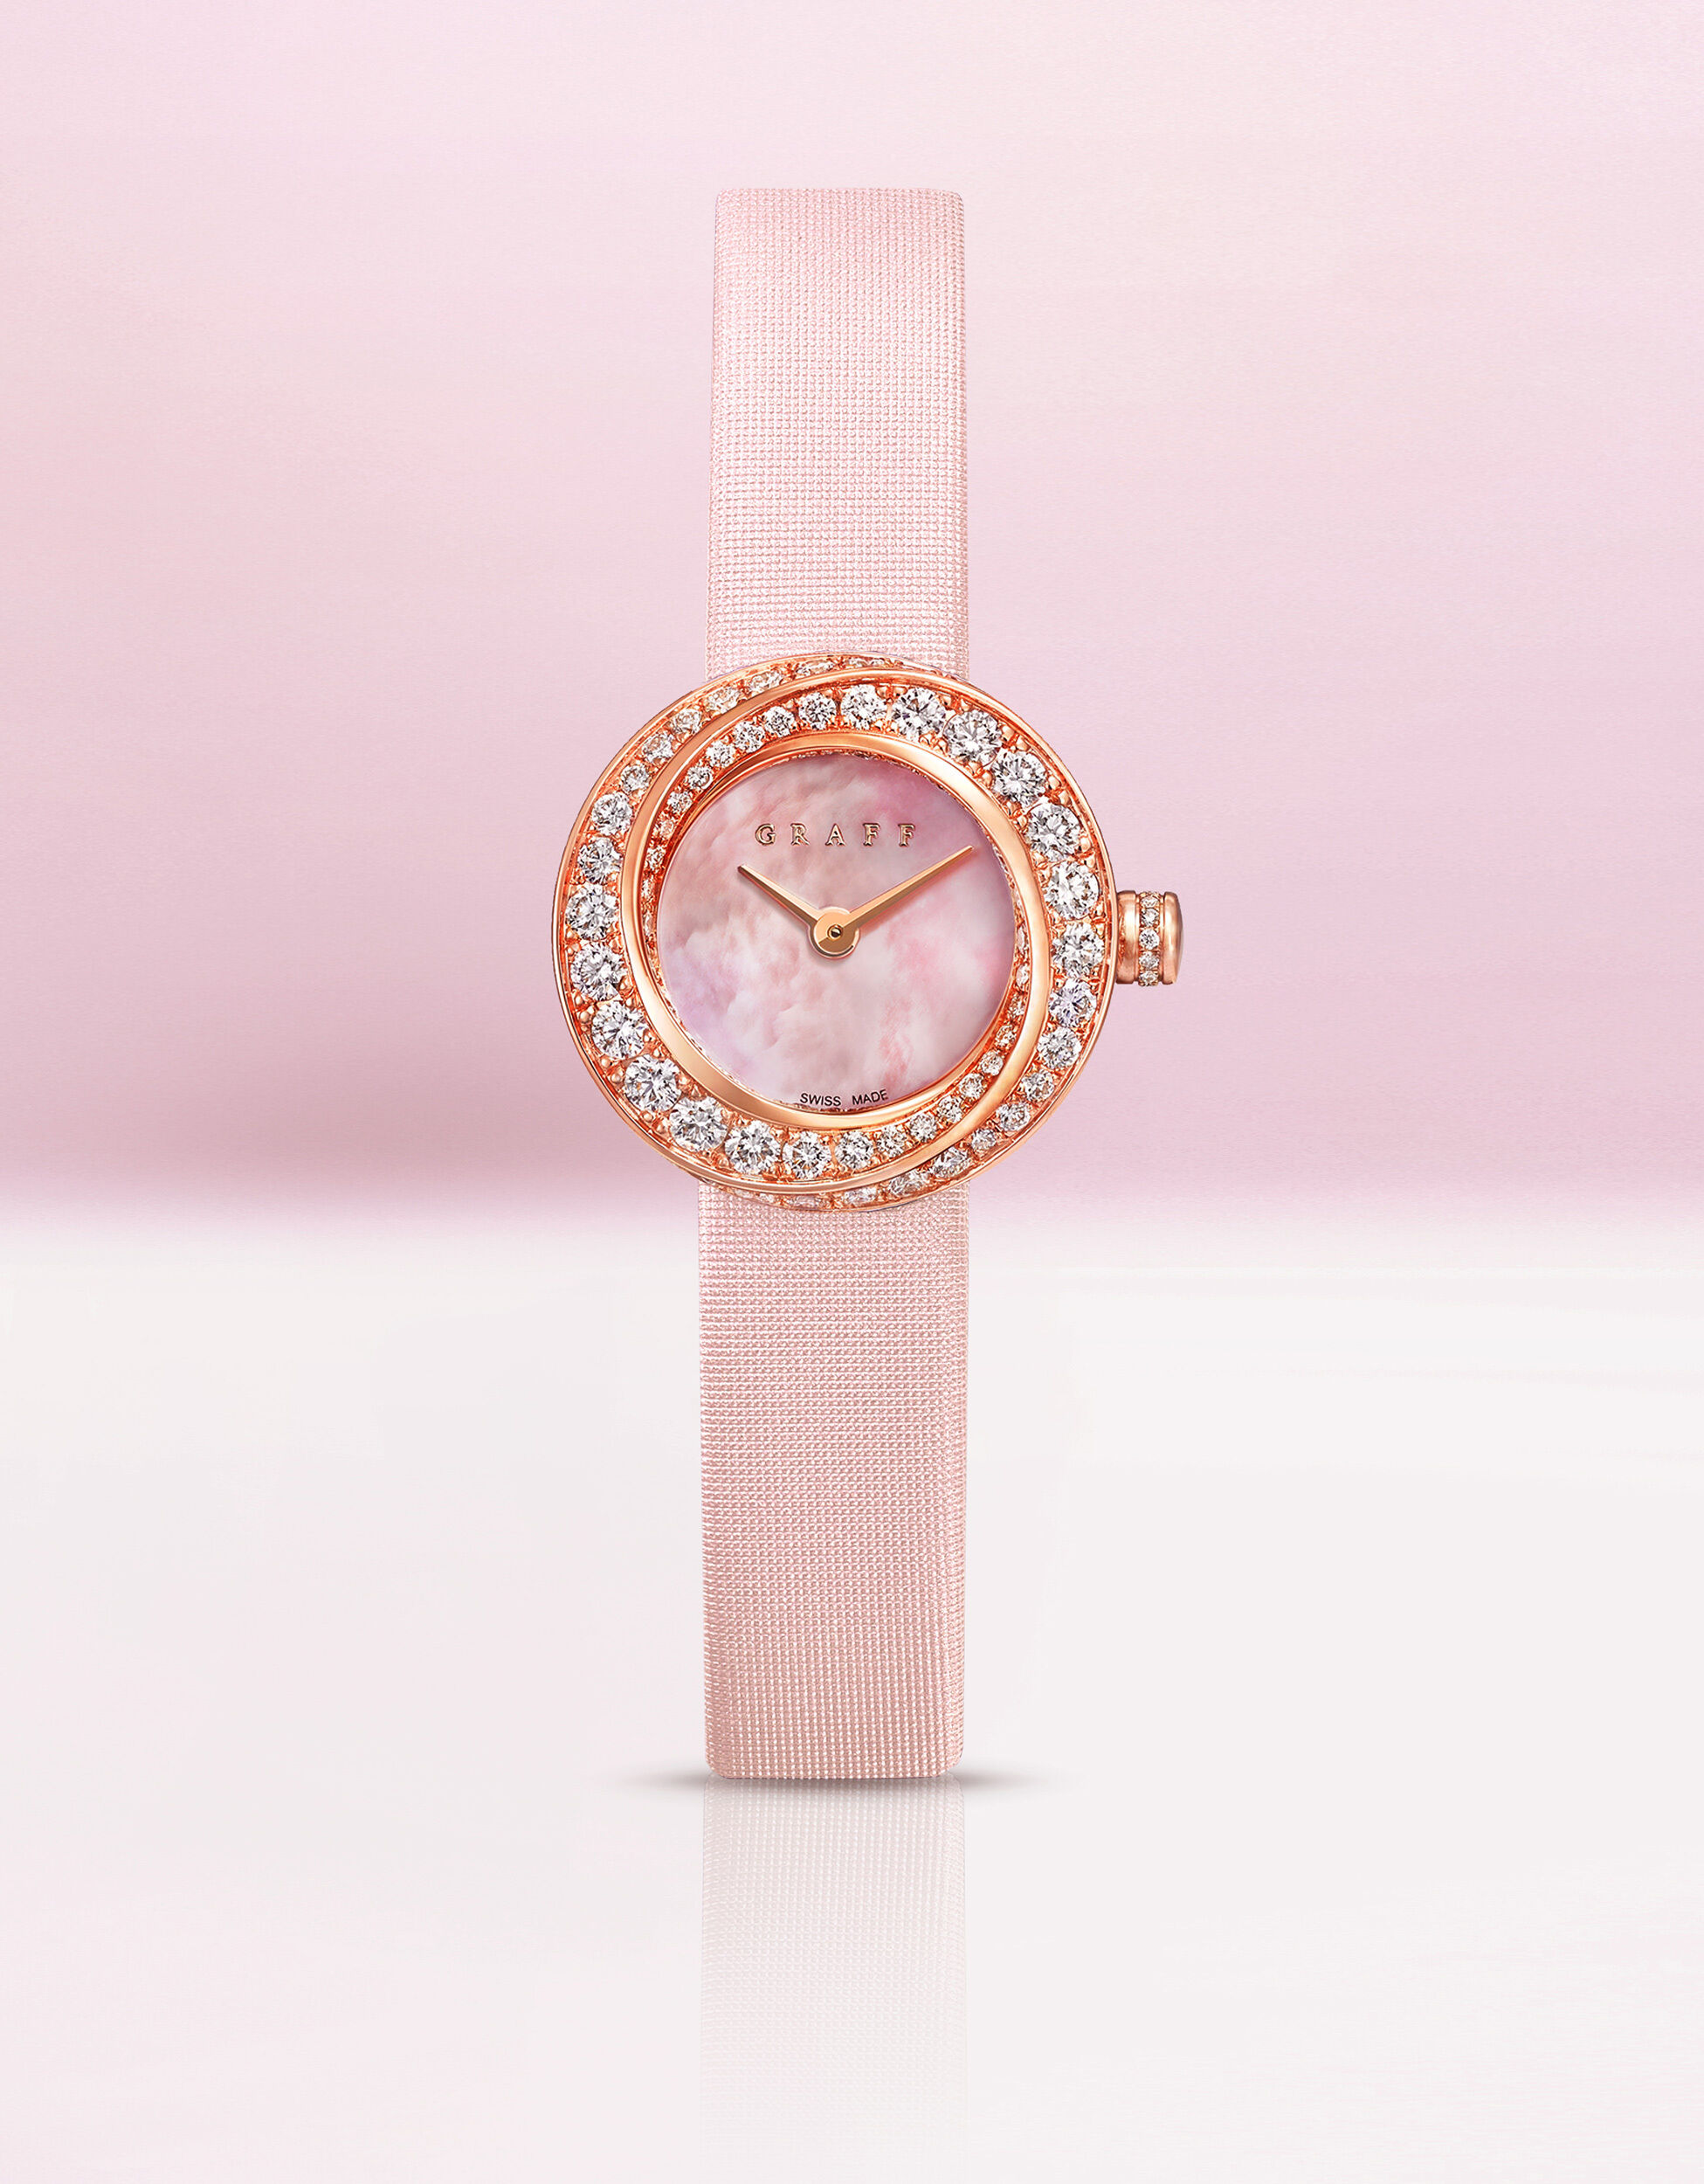 Image of Graff Spiral watch with pink satin strap, pink mother of pearl, rose gold and diamonds